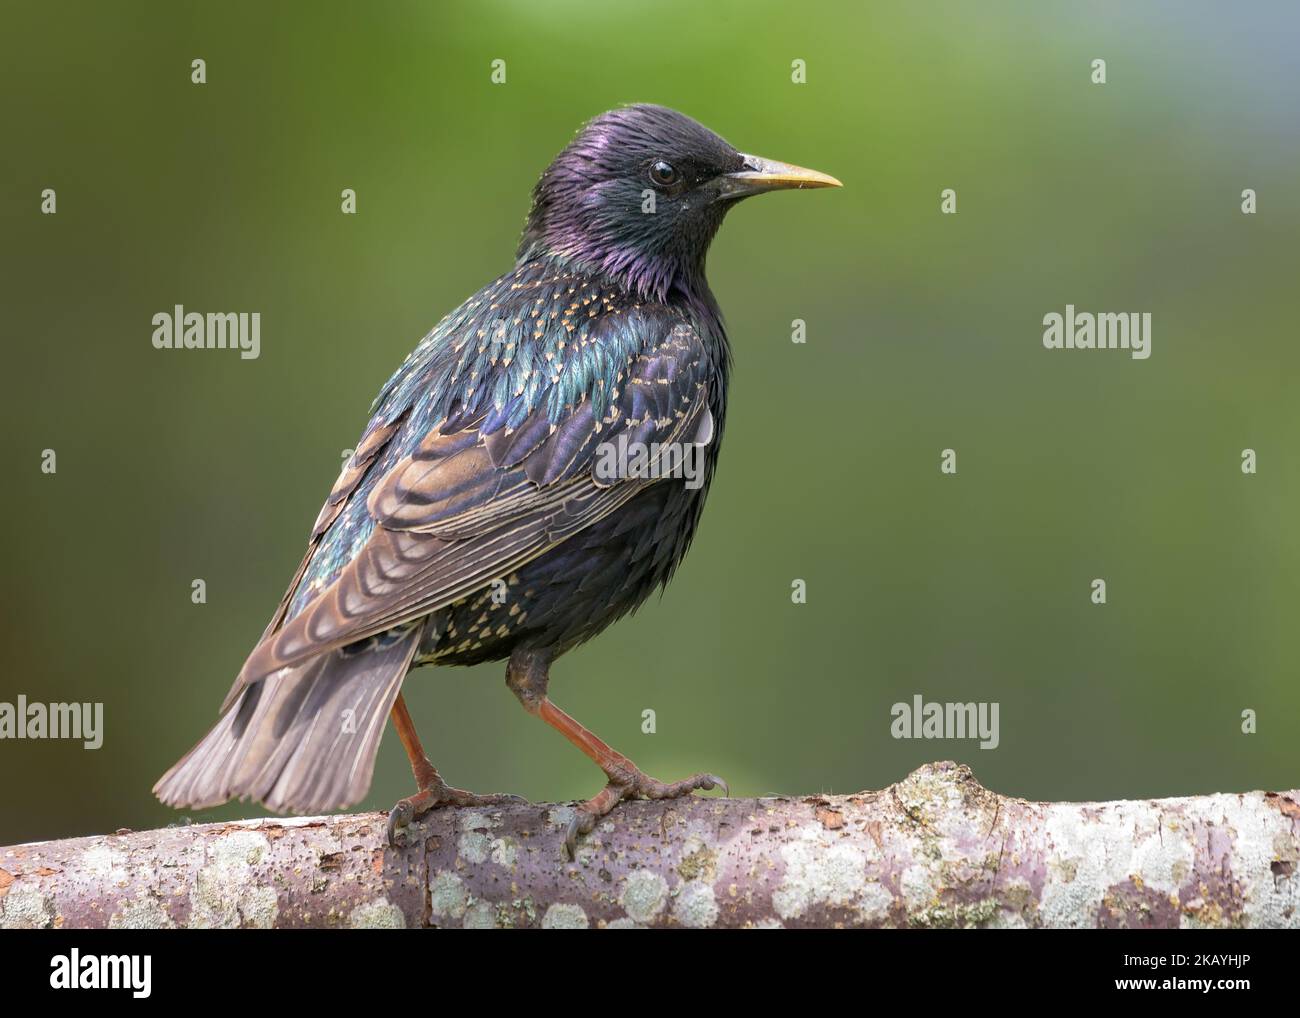 Female Common starling (Sturnus vulgaris) looking curiously and posing on a thick stick Stock Photo